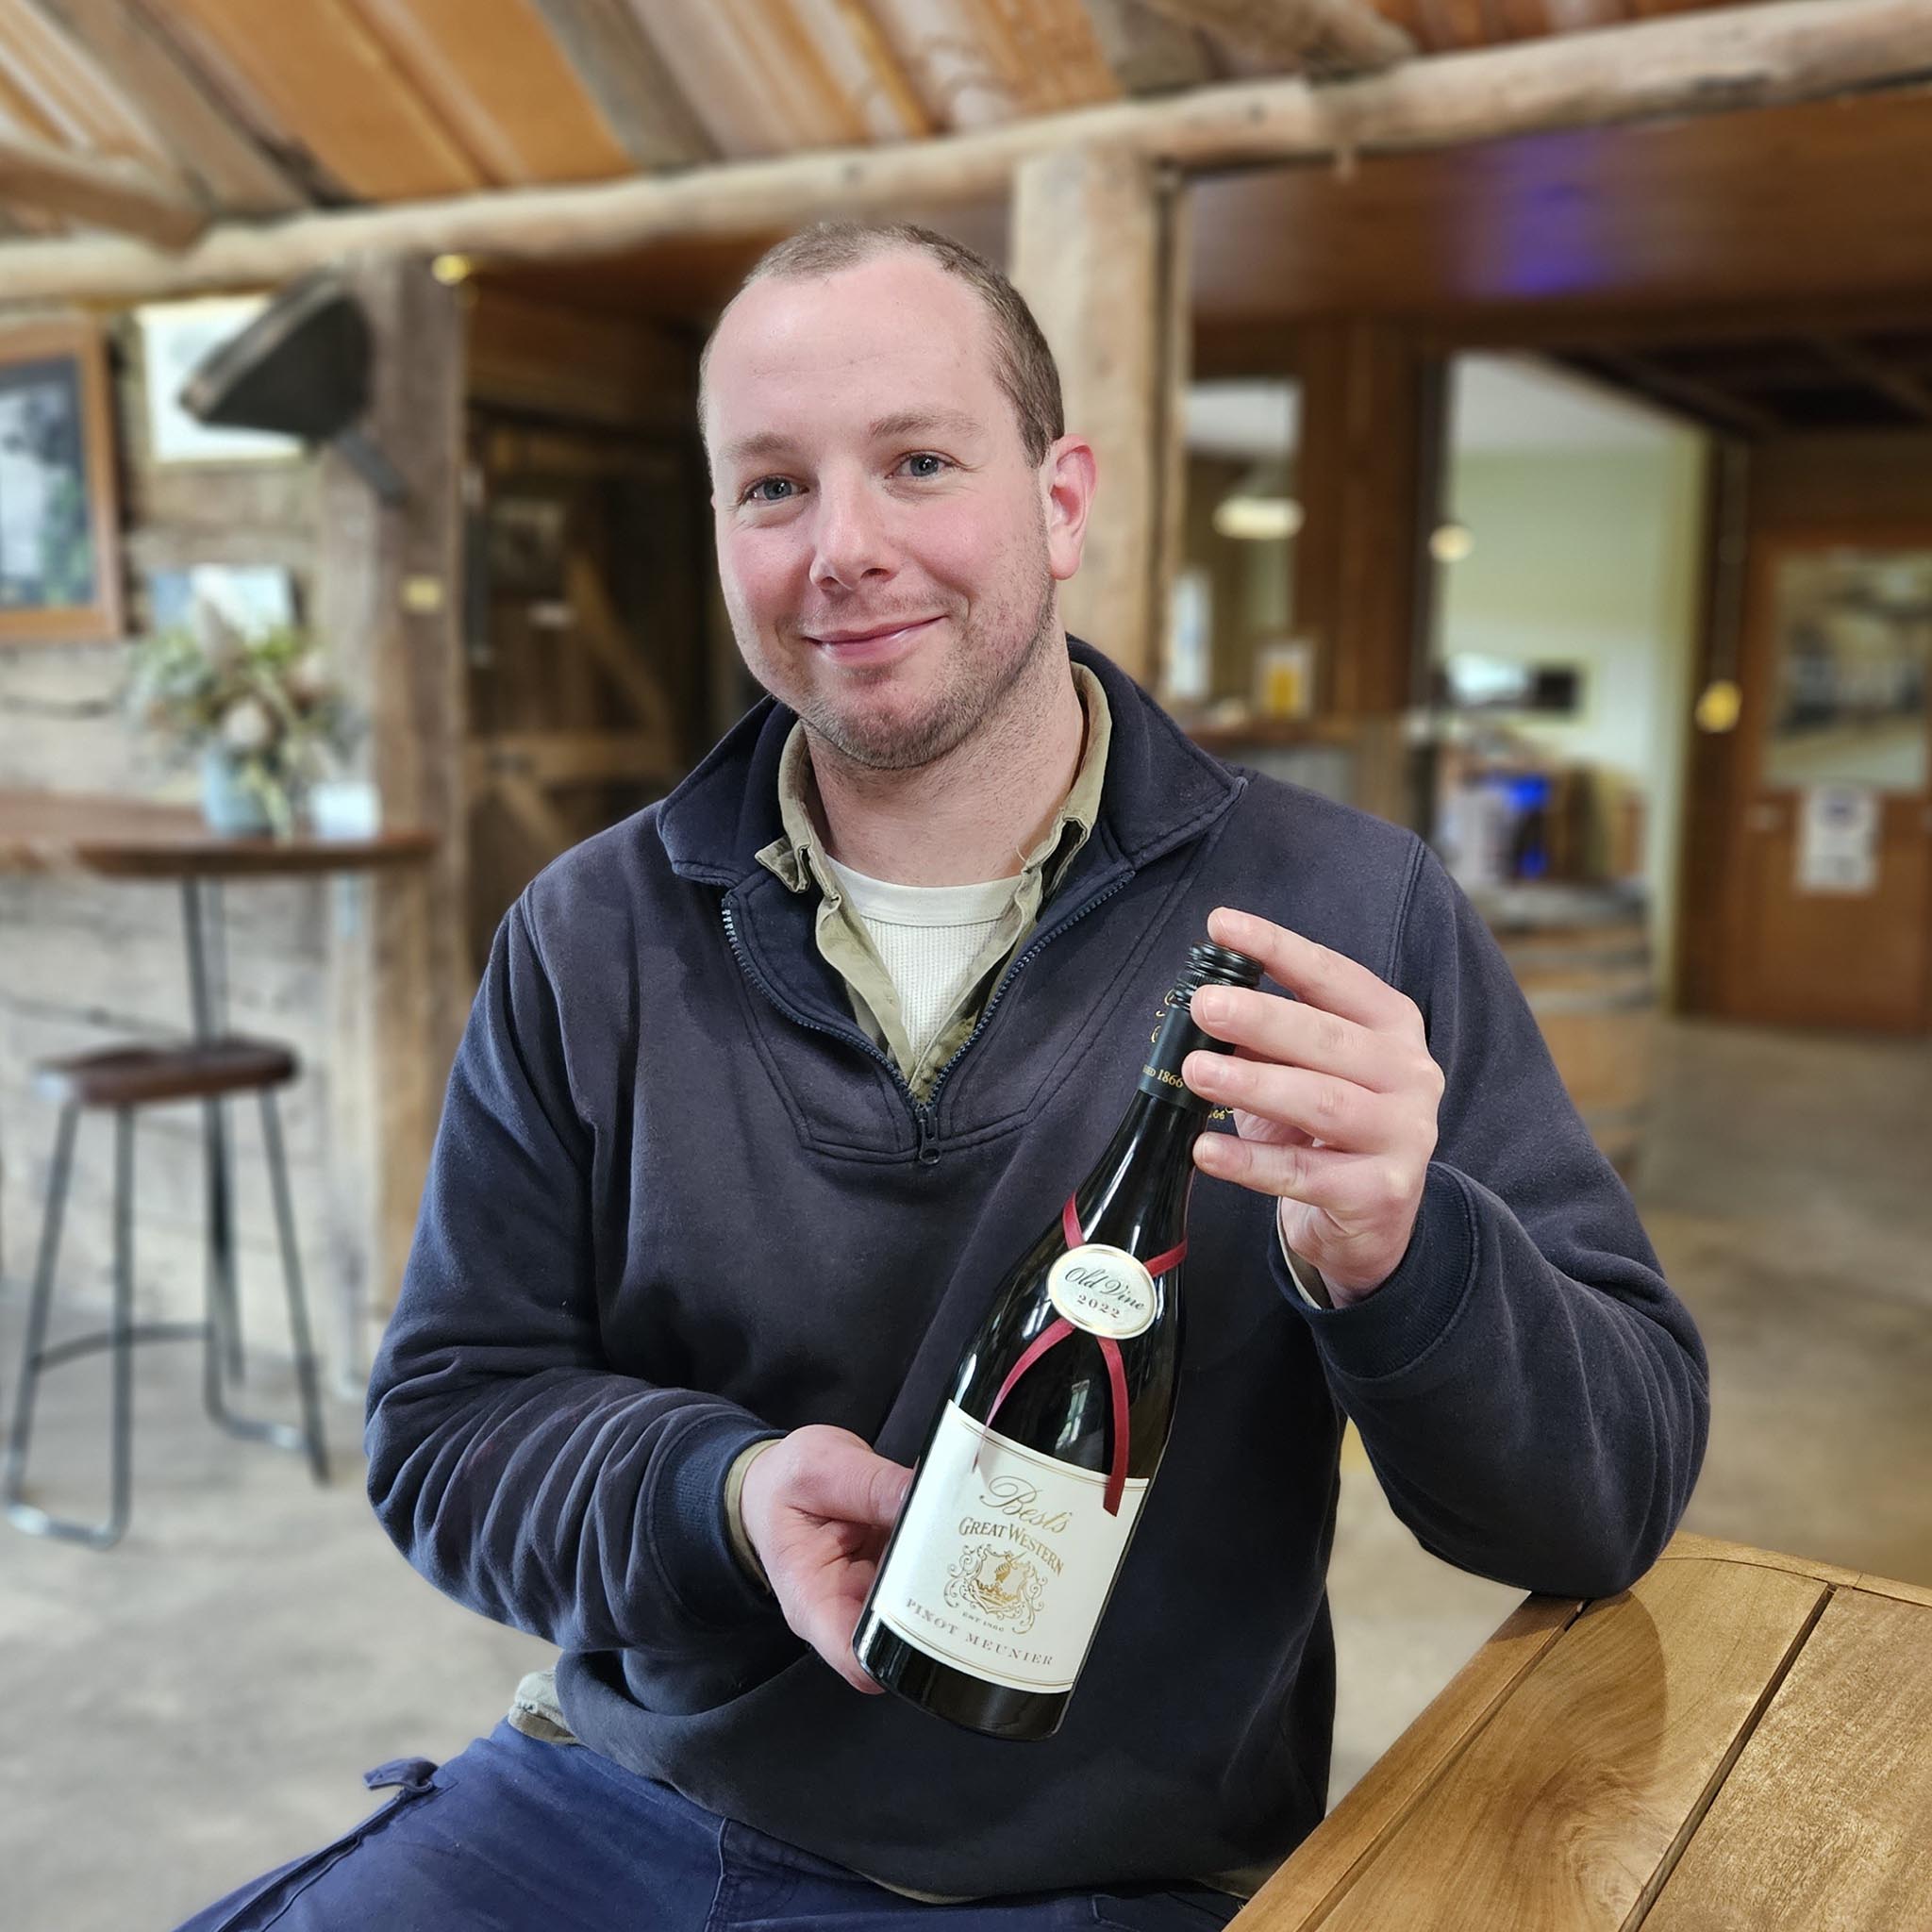 Winemaker Jacob Parton with a bottle of Best's Great Western Old Vine Pinot Meunier